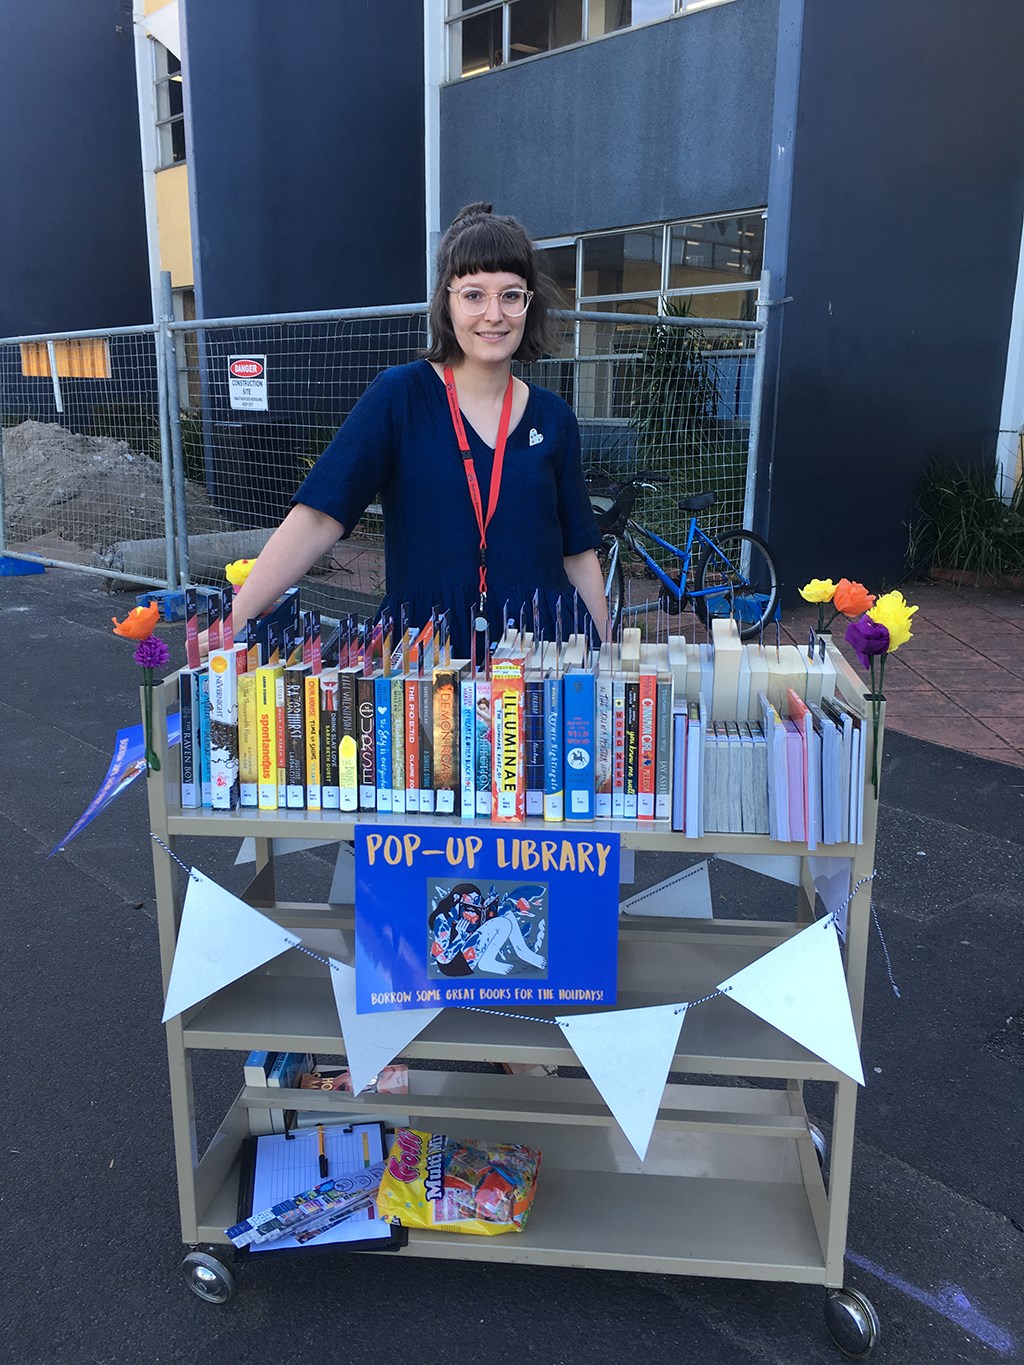 Teacher outside with a pop-up library to encourage reading